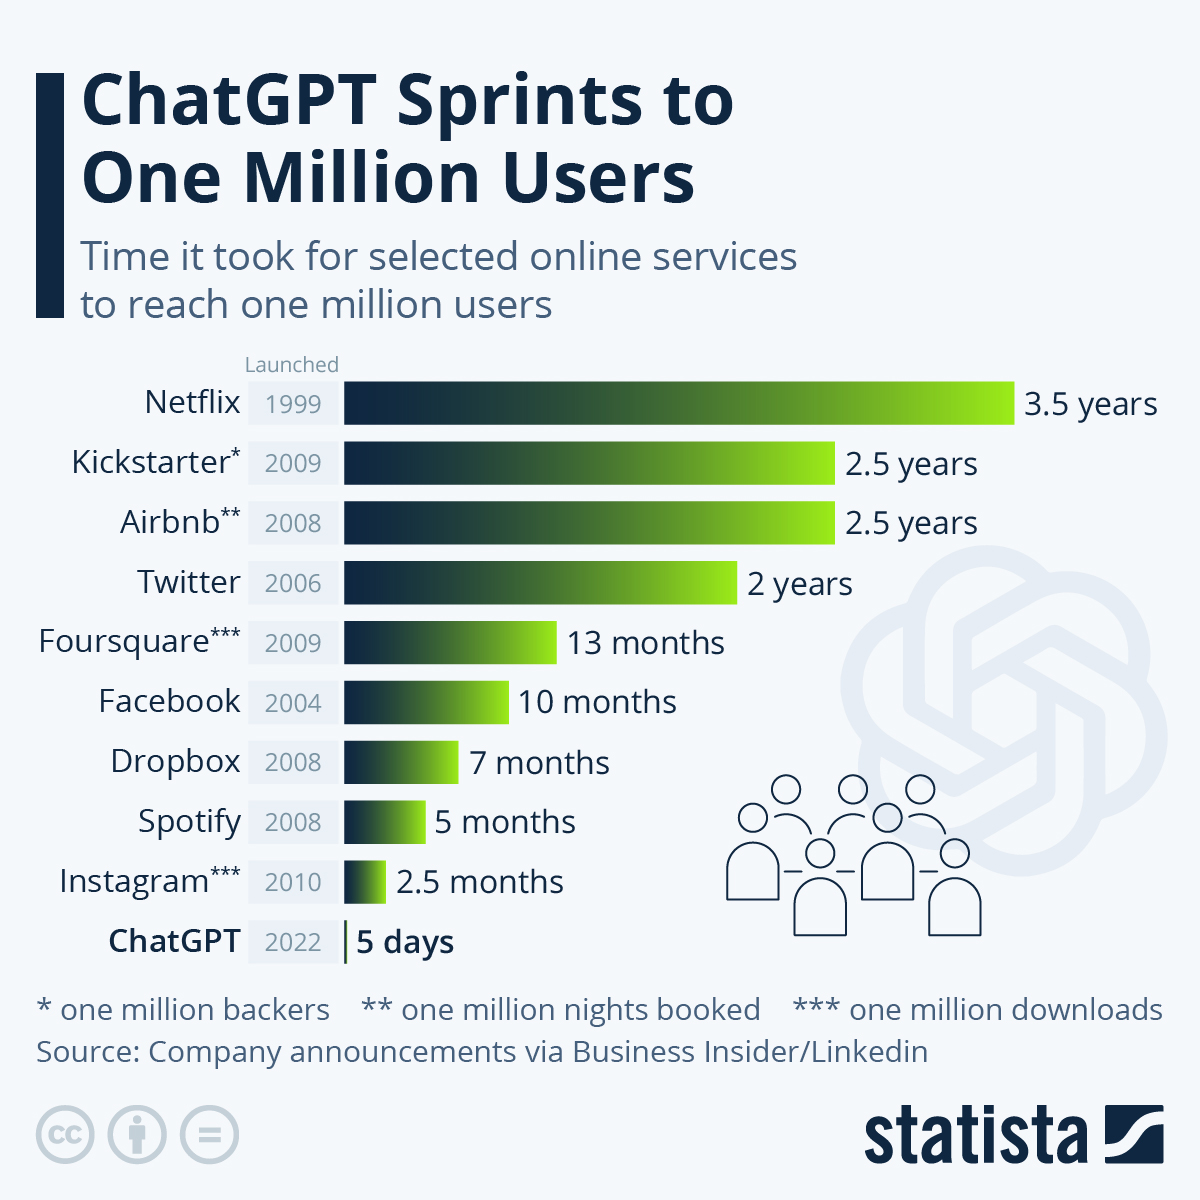 ChatGPT sprints to one million users in 5 days, compared to other larger brands like Instagram and Spotify, which took 2.5 months and 5 months respectively.